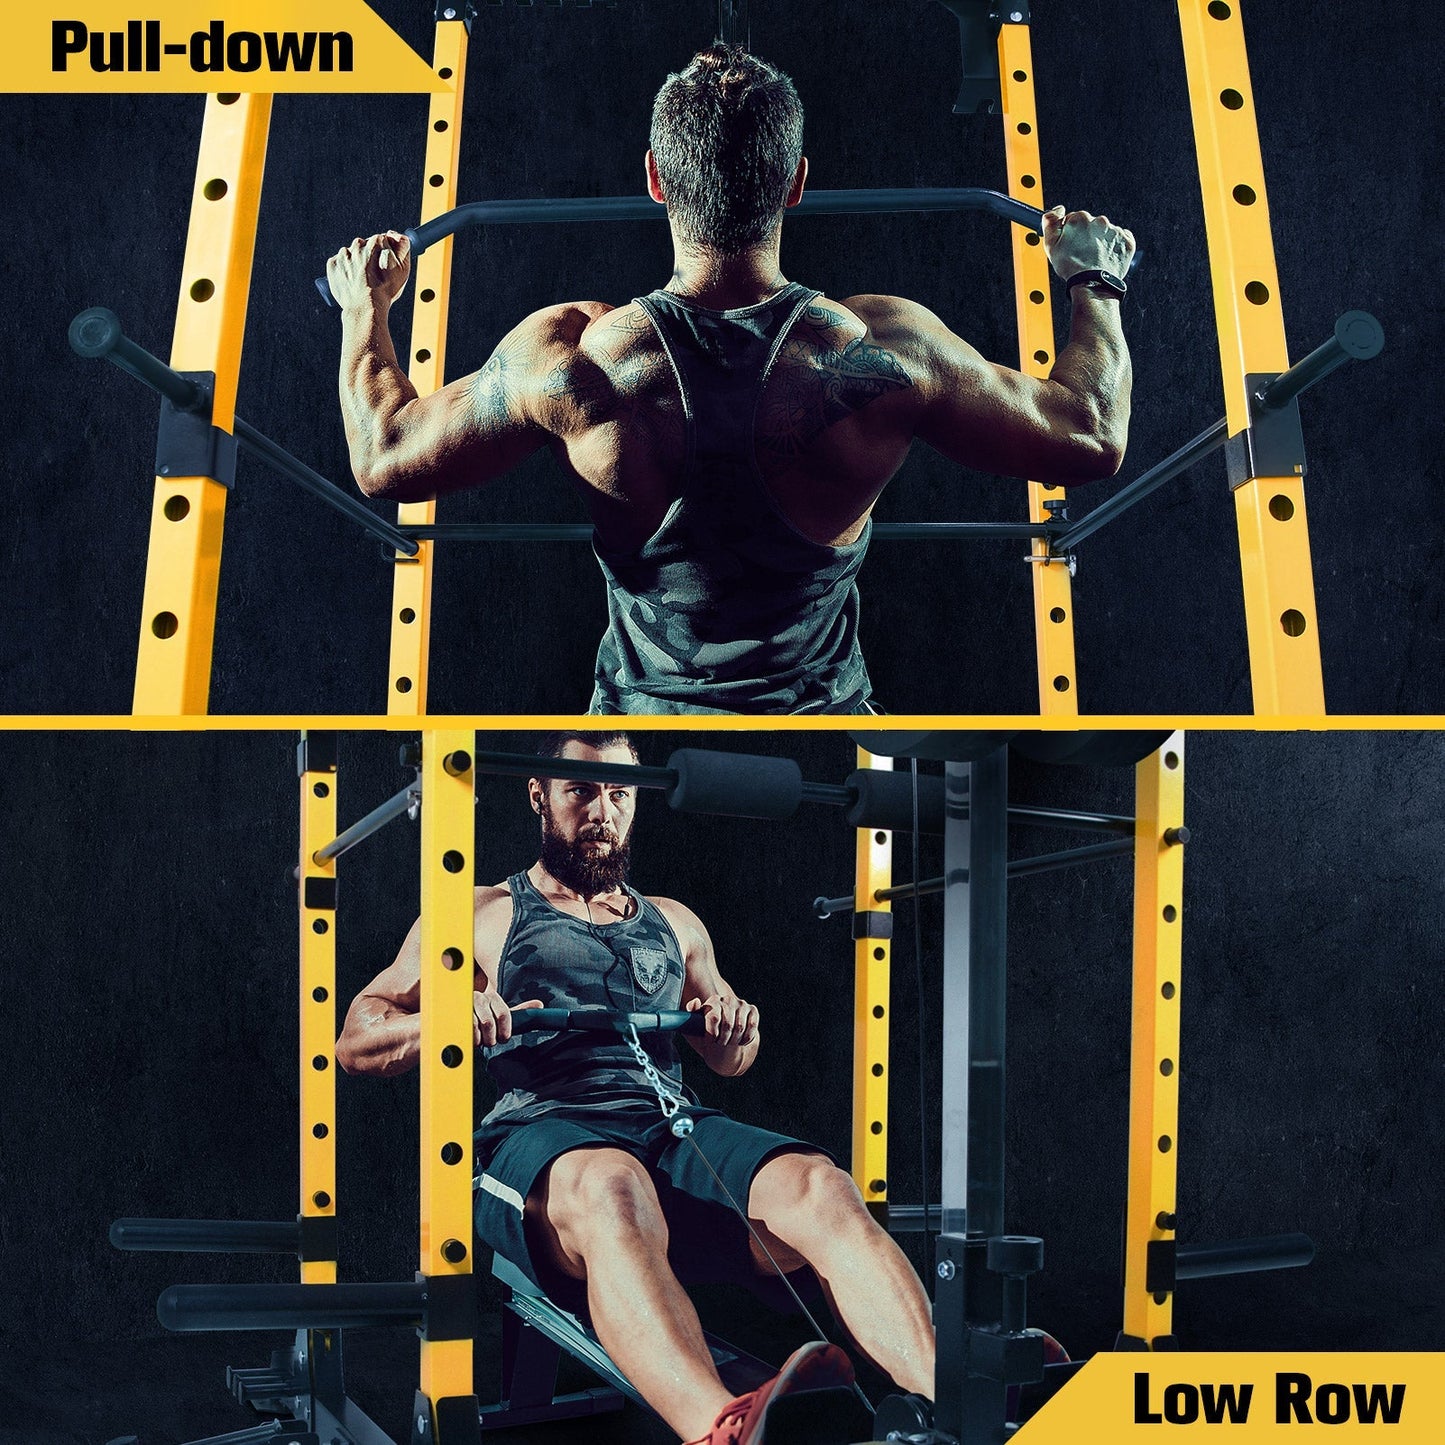 Pull-down & Low Row